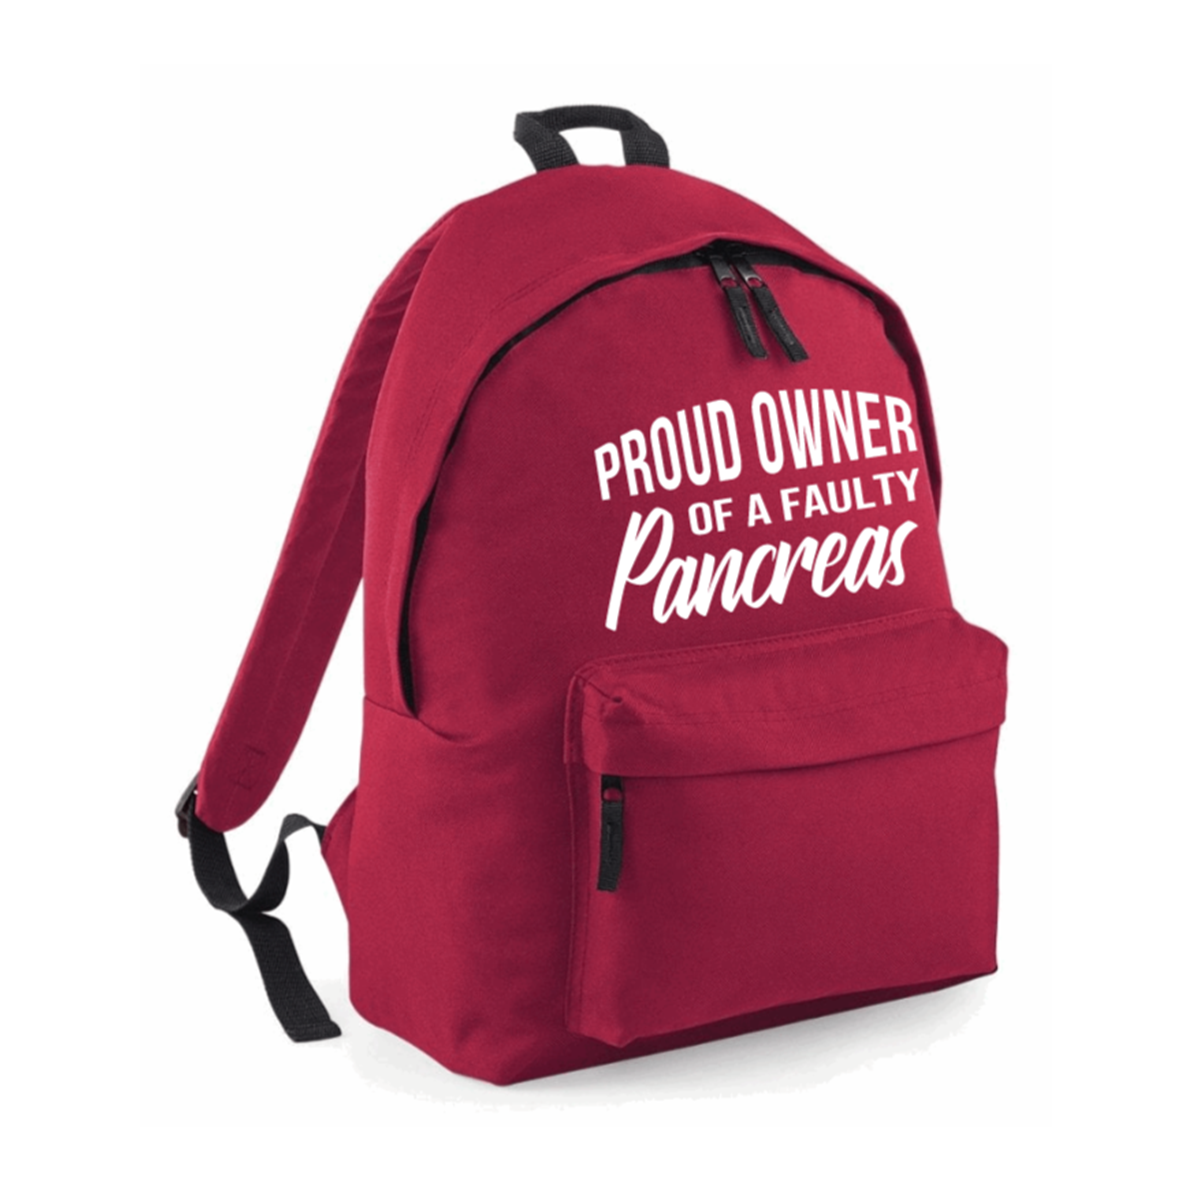 Proud Owner Of A Faulty Pancreas Backpack